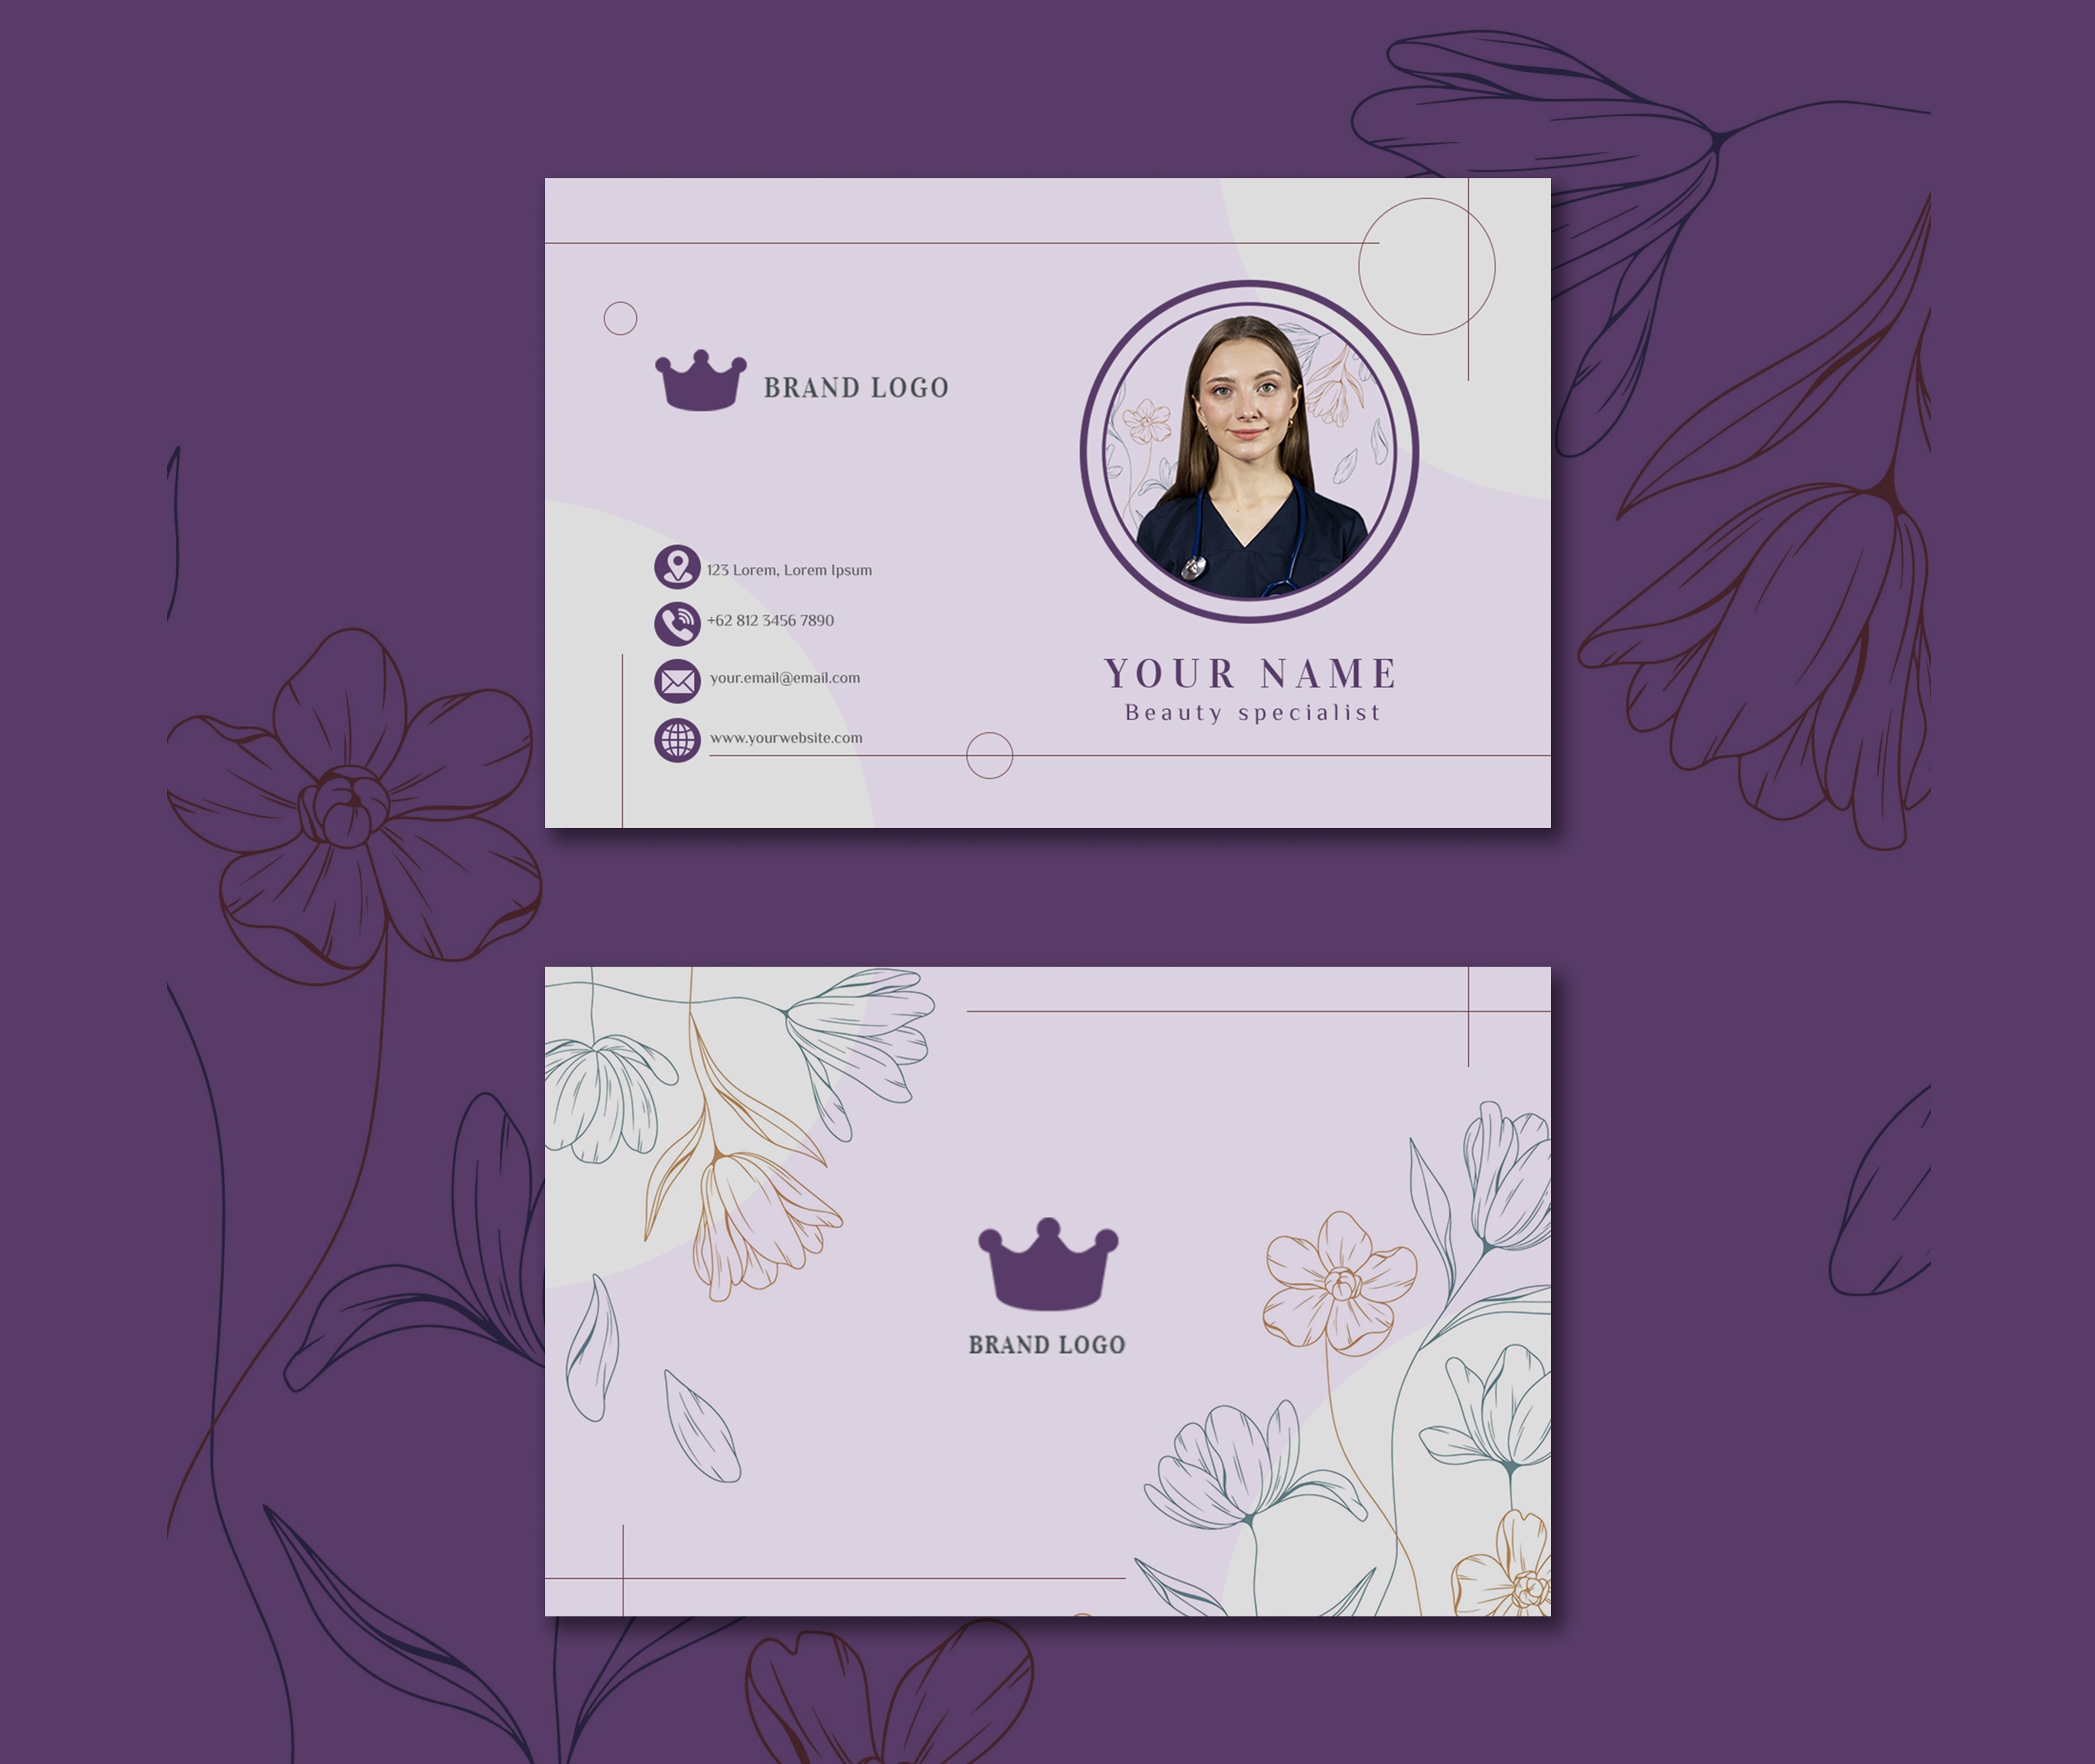 plastic-surgery-business-card-template-8369611